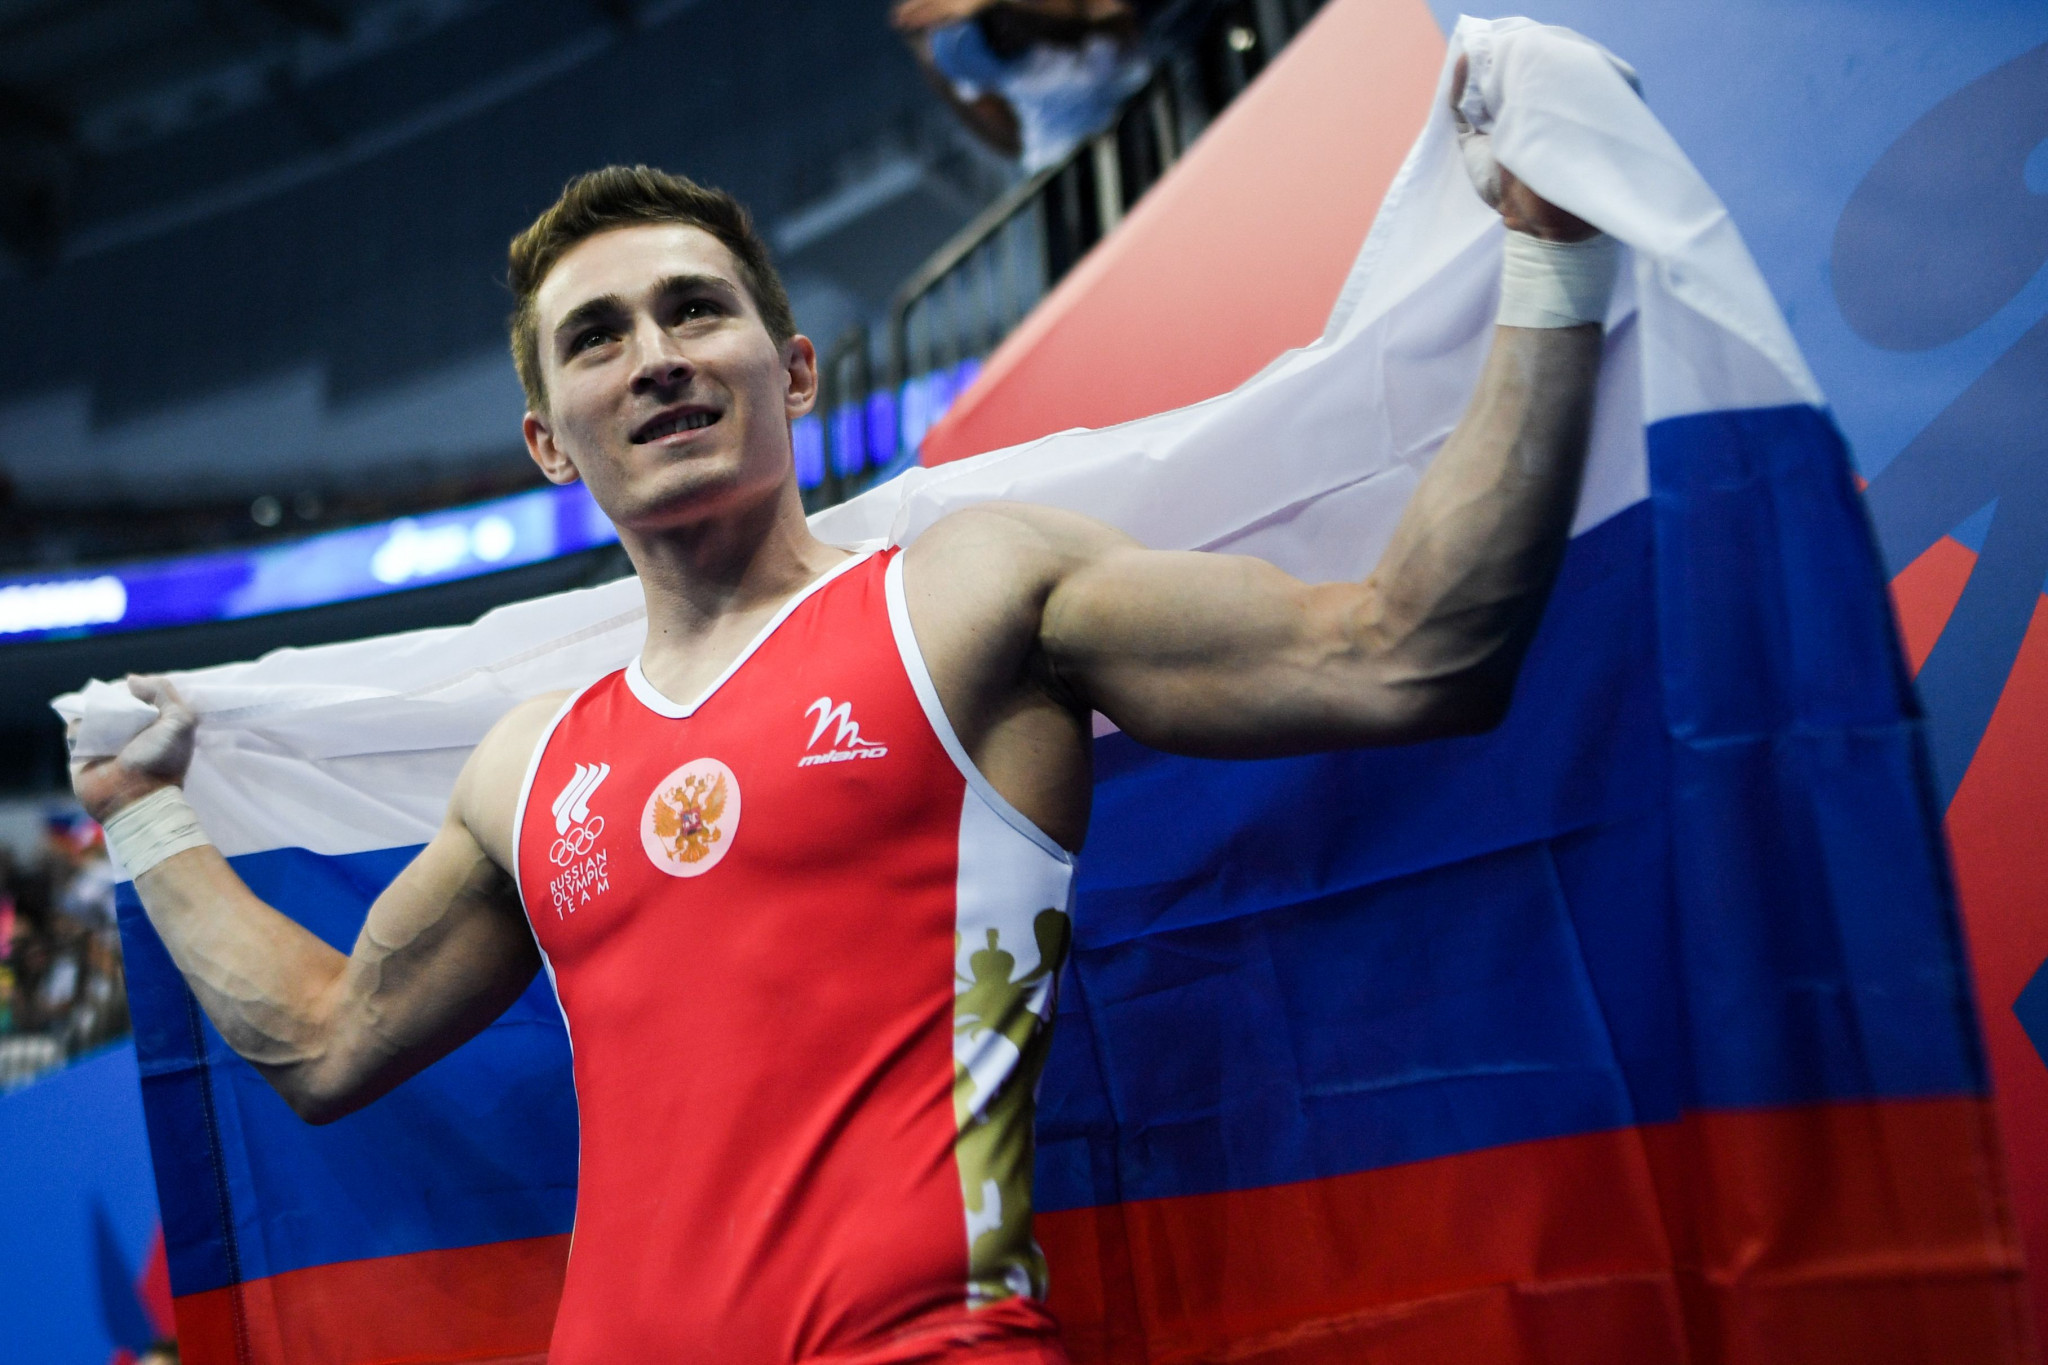 Belyavskiy chips in with second gymnastics gold as Russia finish distant leaders of Minsk 2019 medals table ahead of hosts